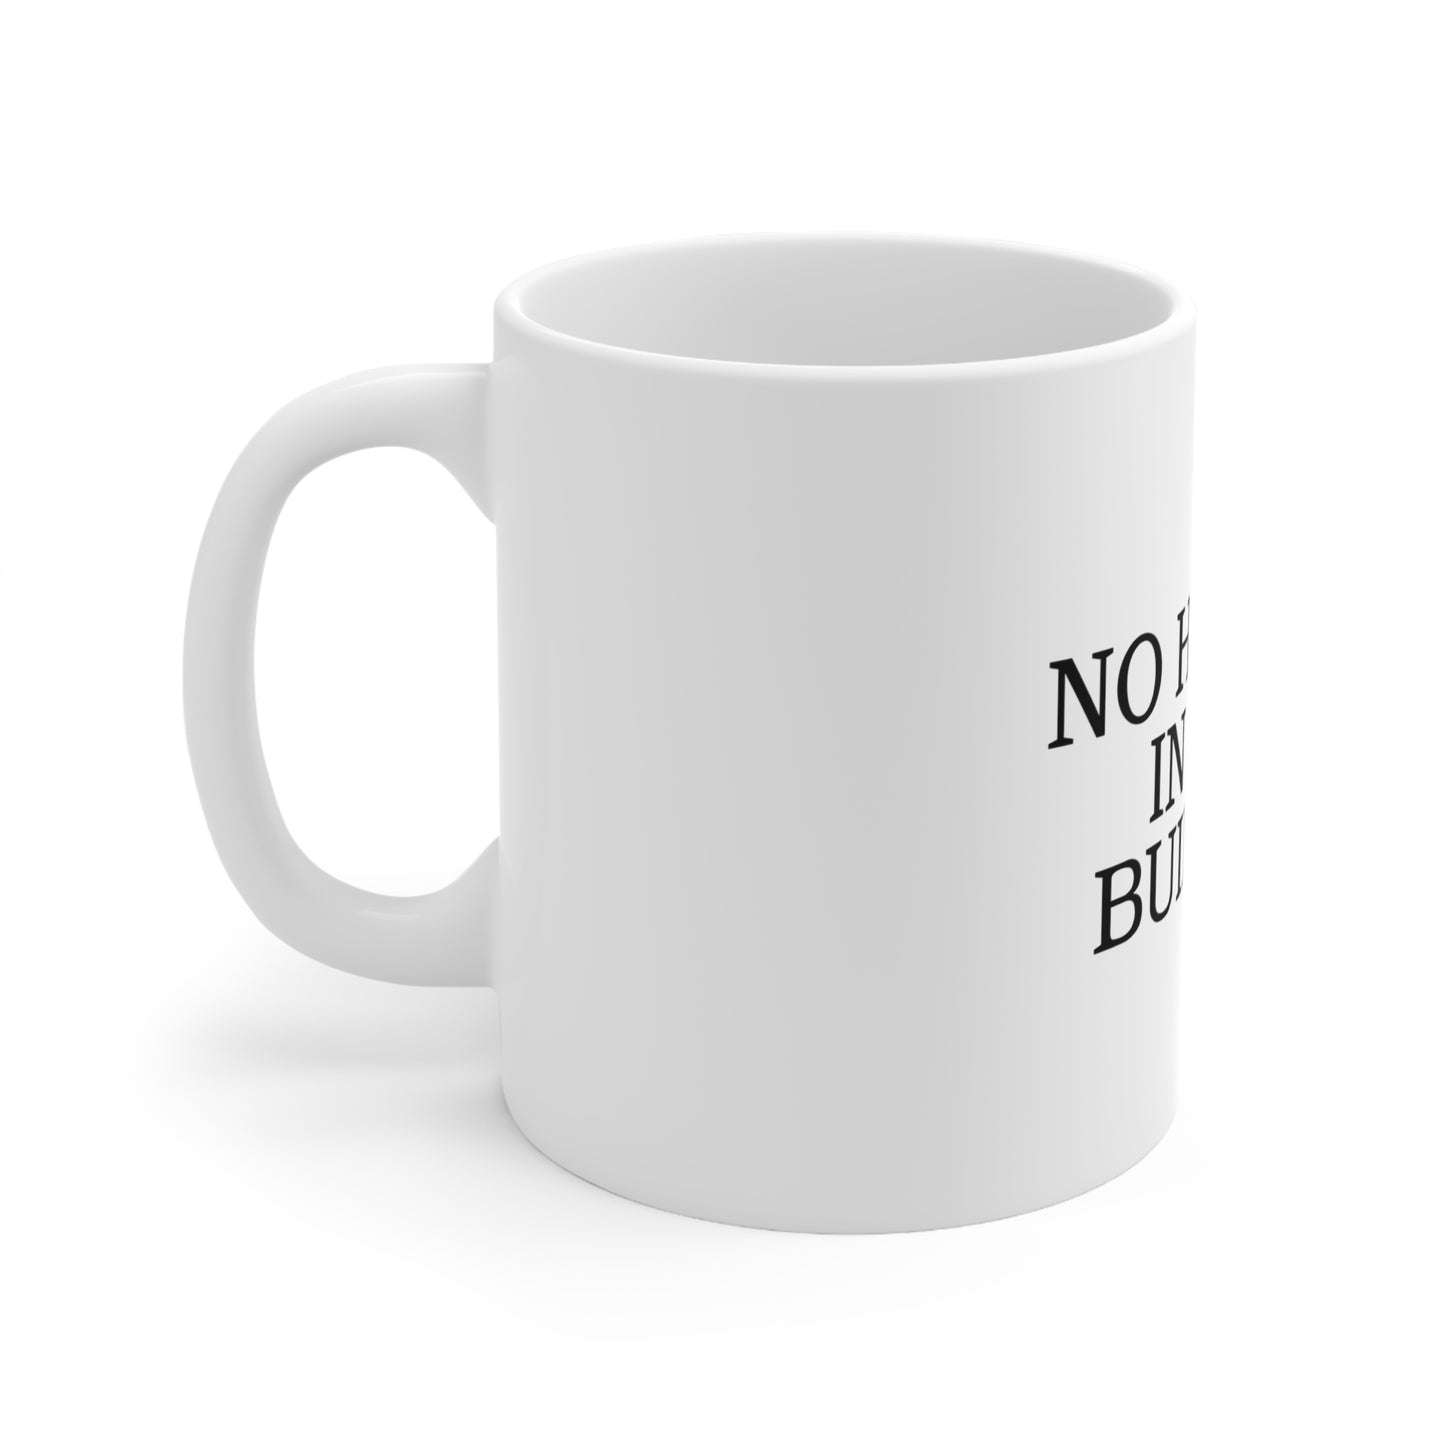 No Haters In The Building 11oz Mug Great housewarming Gift